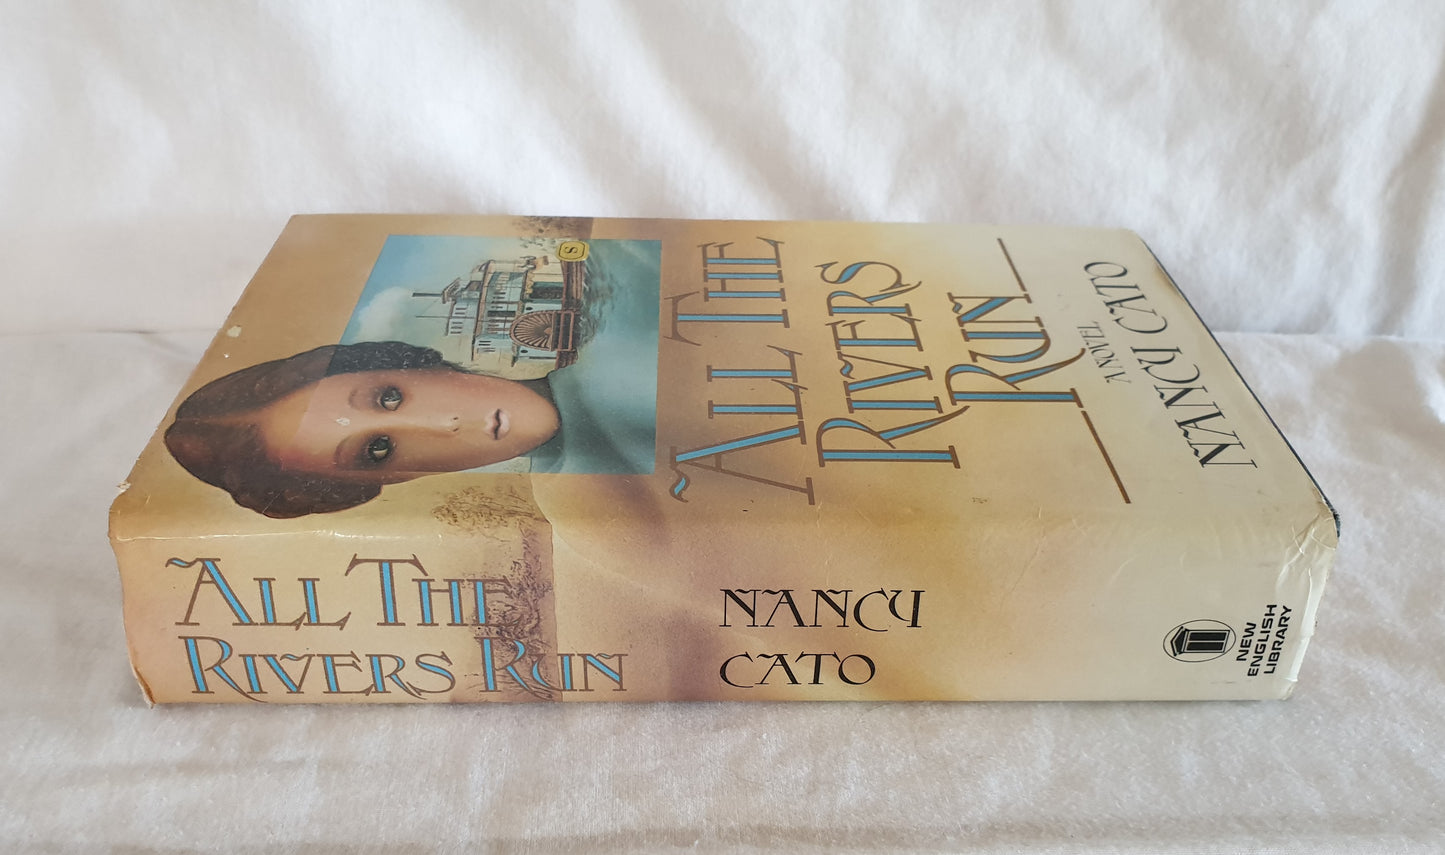 All The Rivers Run by Nancy Cato